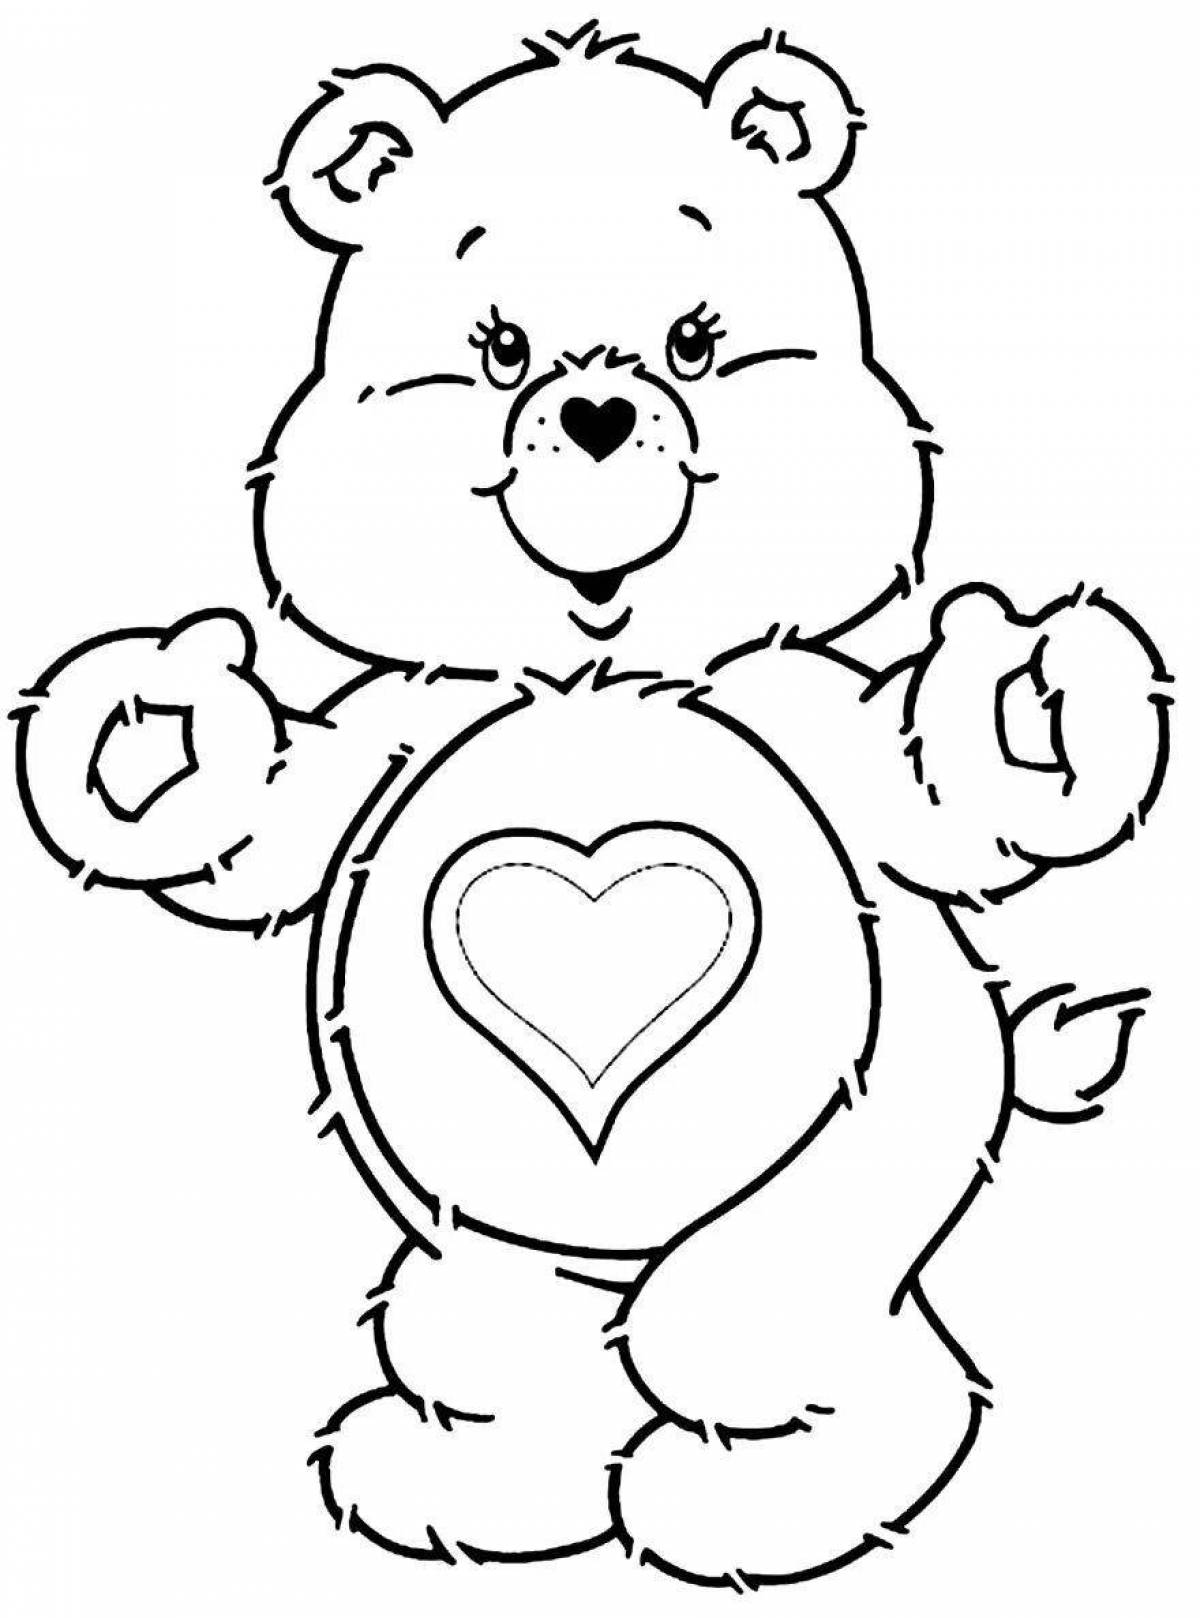 Colored teddy bear with heart coloring book